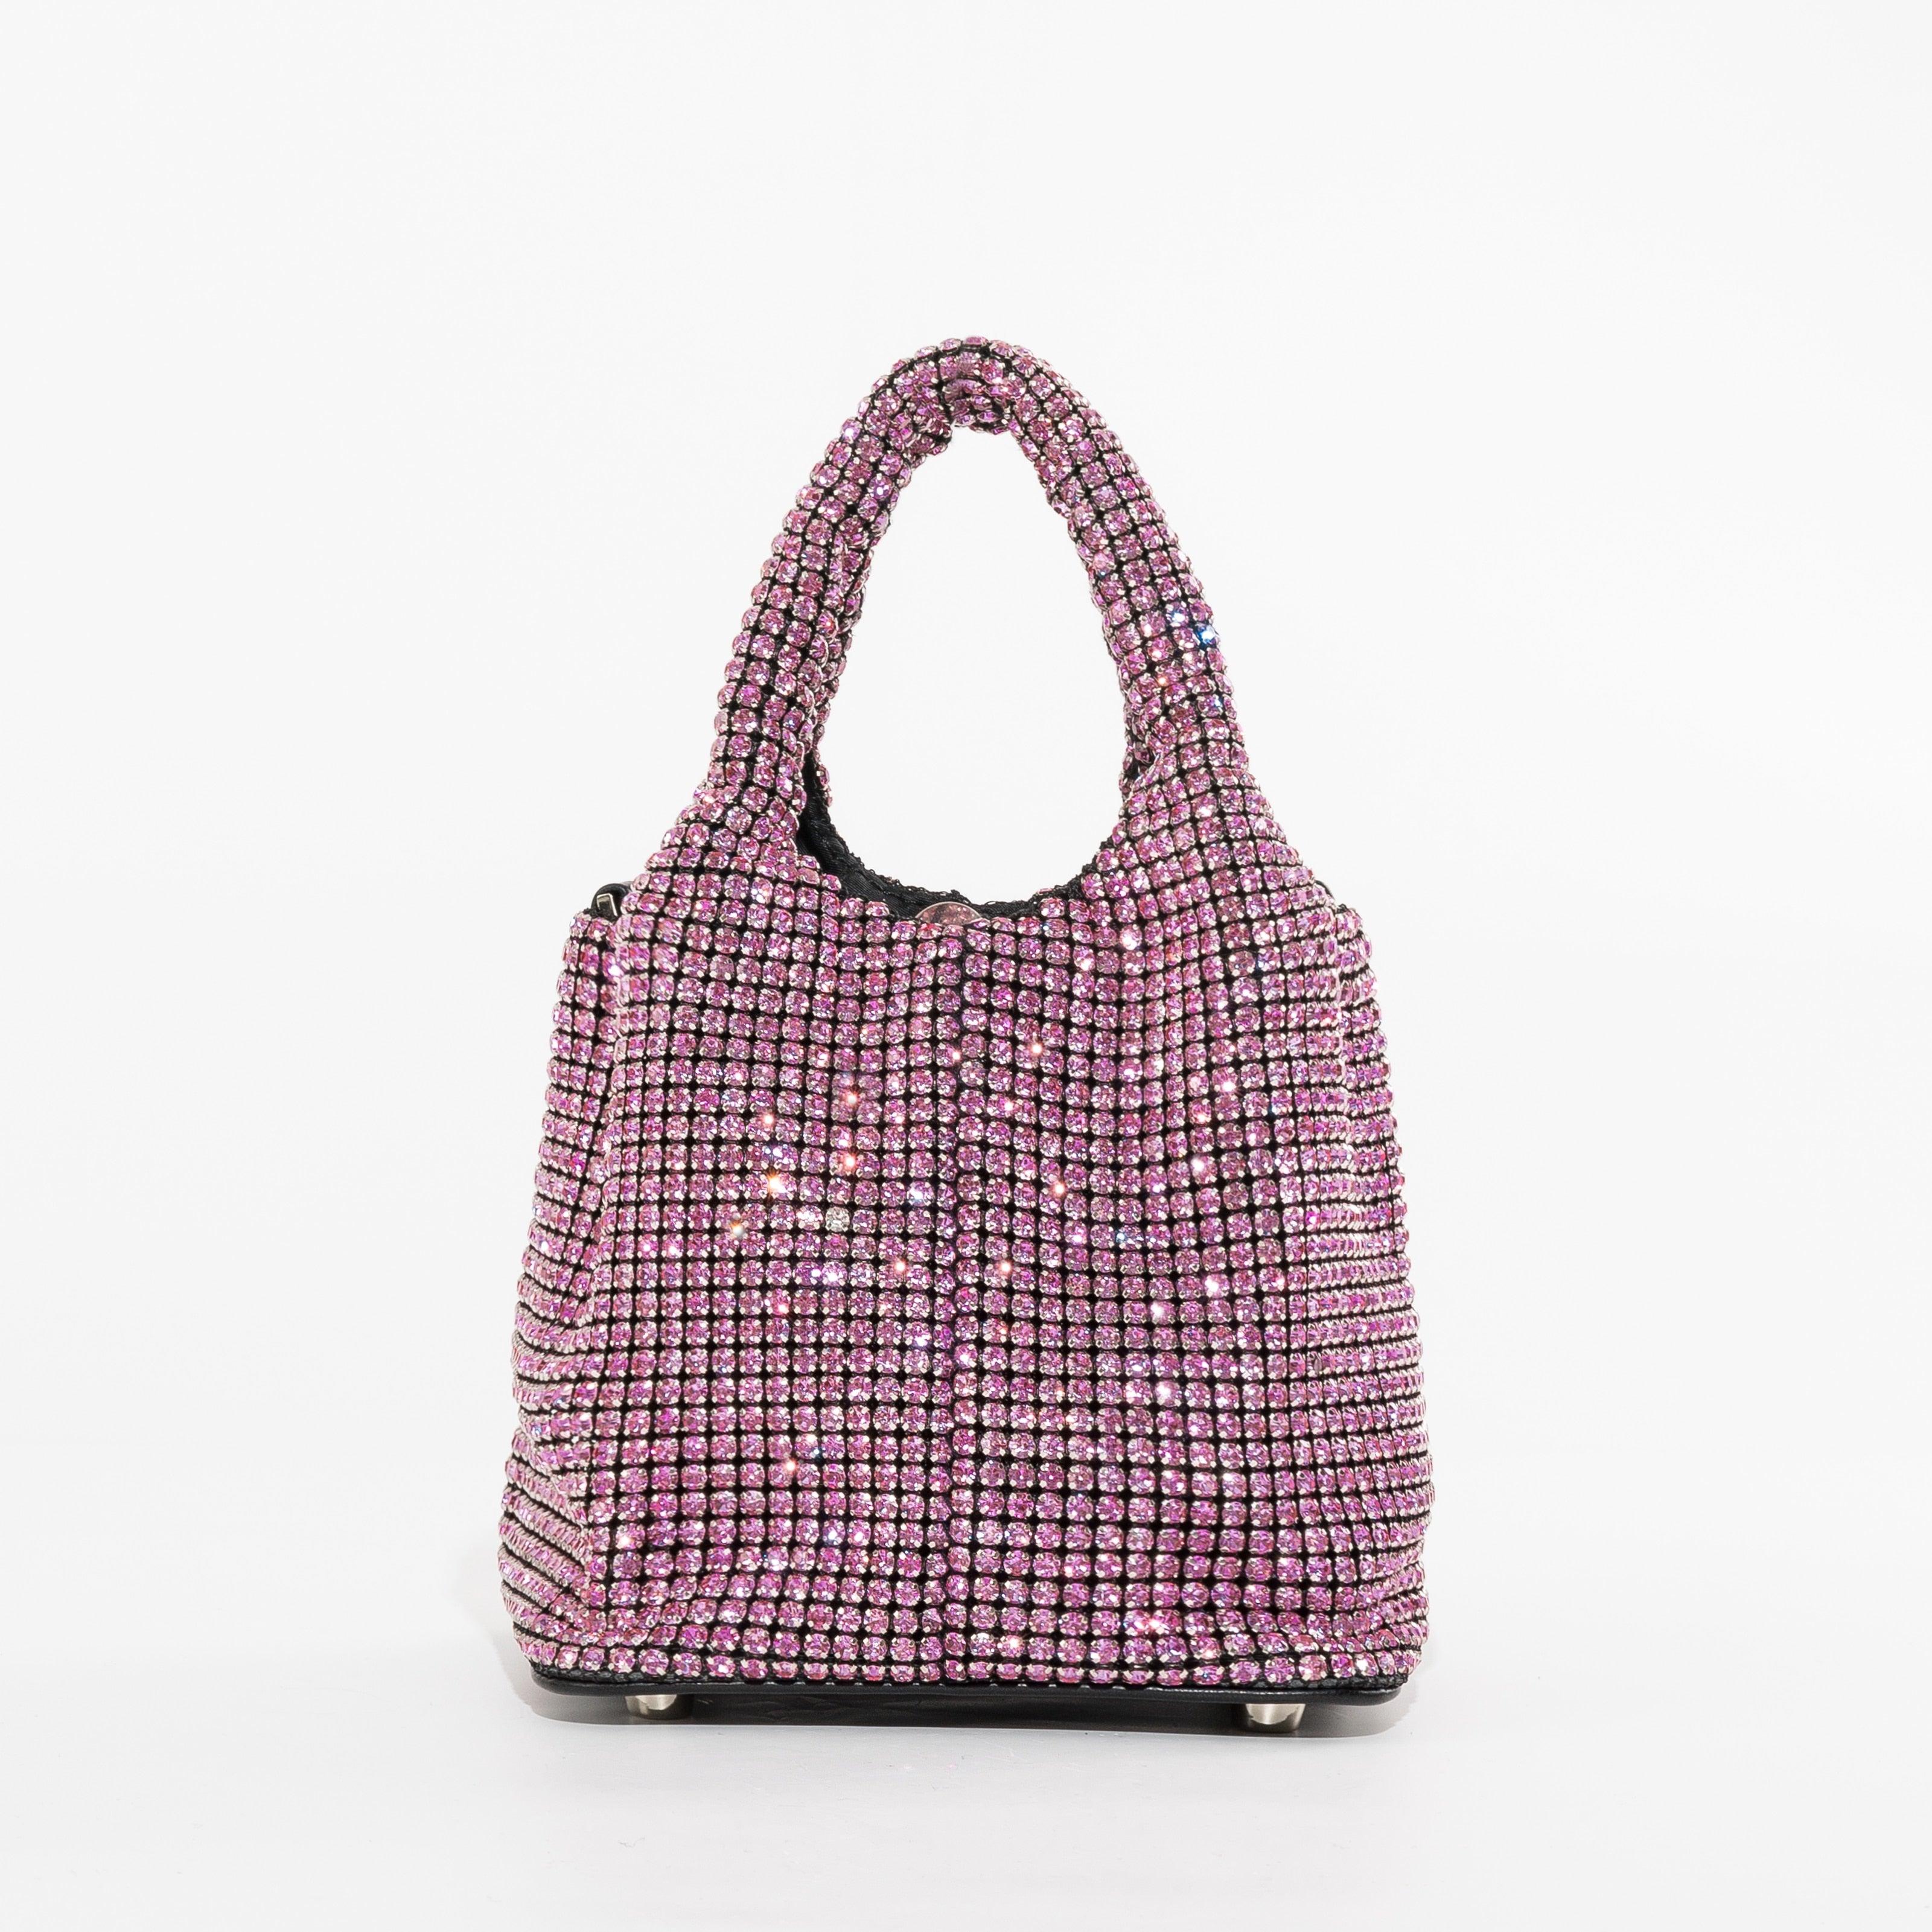 Prada - Re-Edition 2000s Crystal Bag | Mitchell Stores